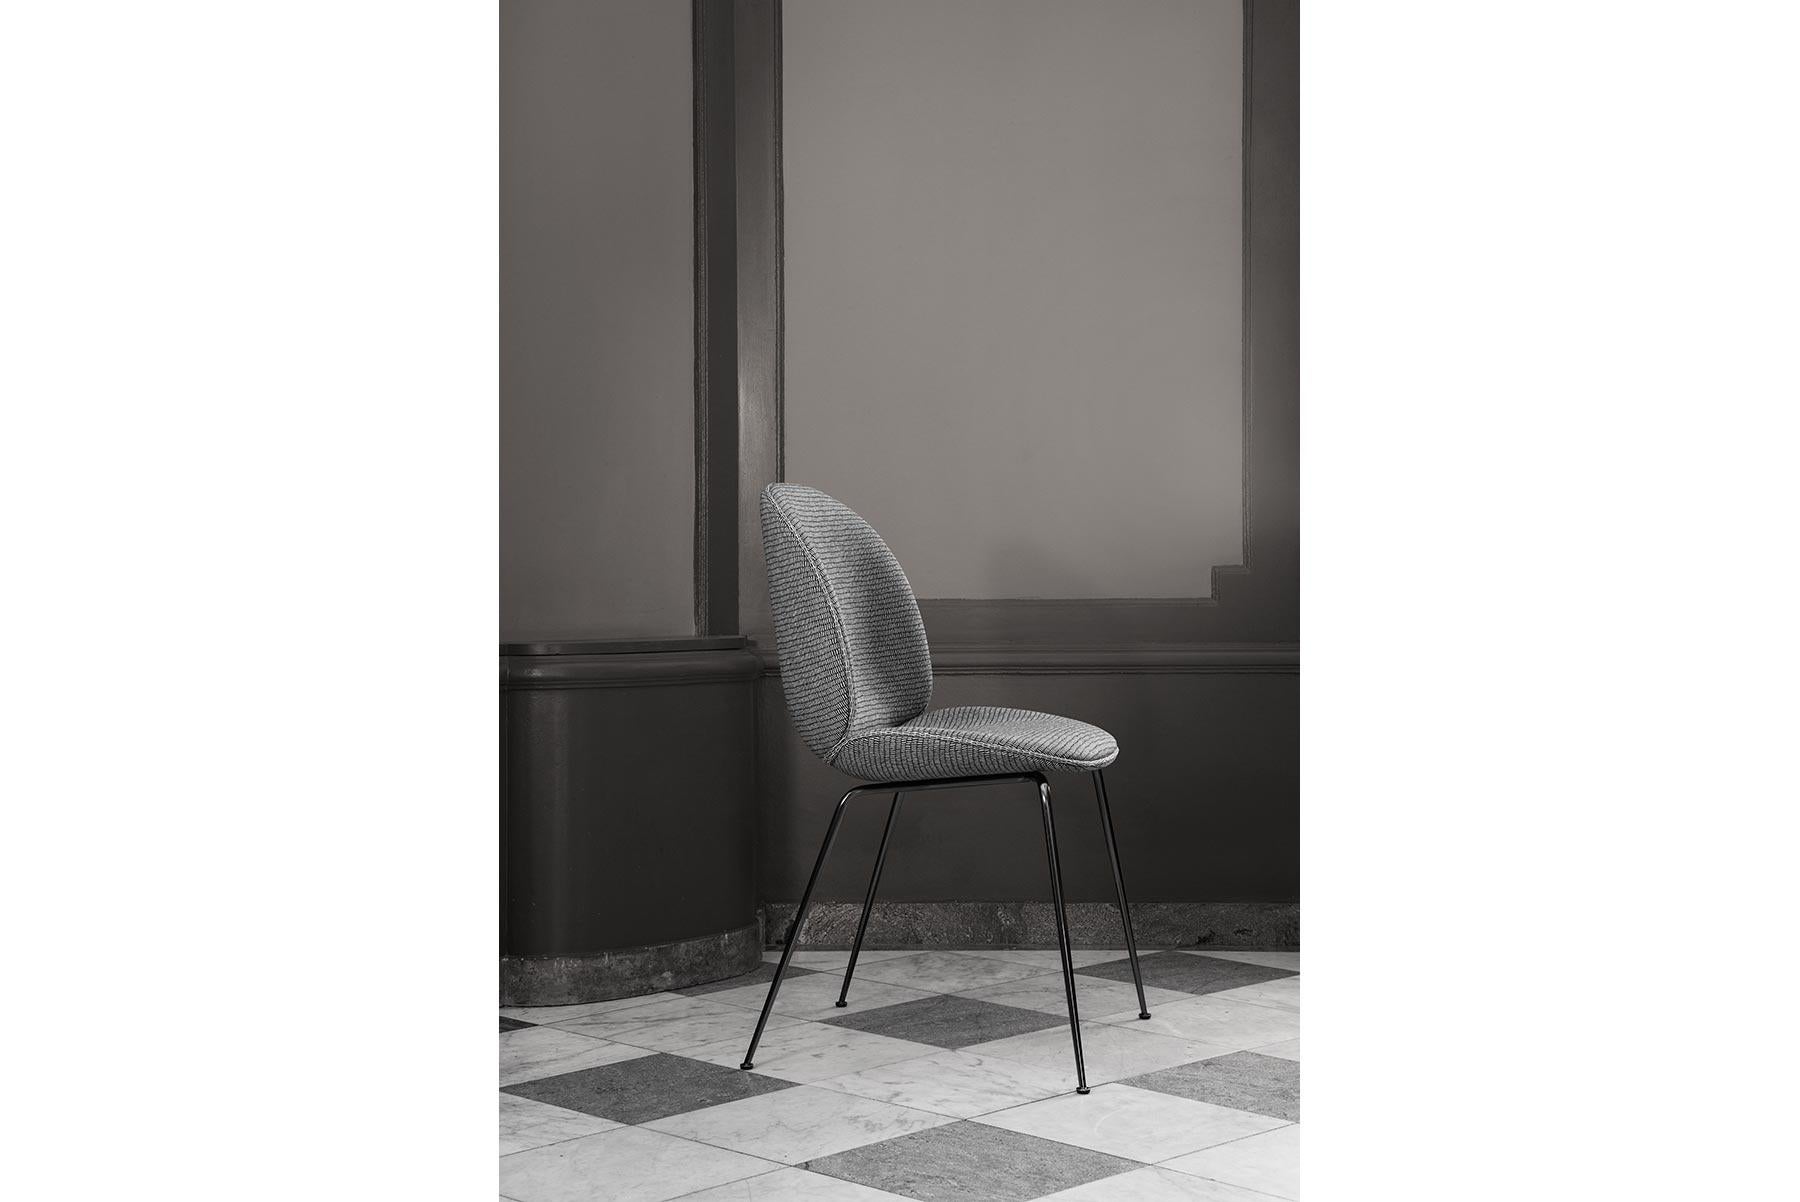 Anodized Beetle Dining Chair, Un-Upholstered, Conic Base, Chrome For Sale